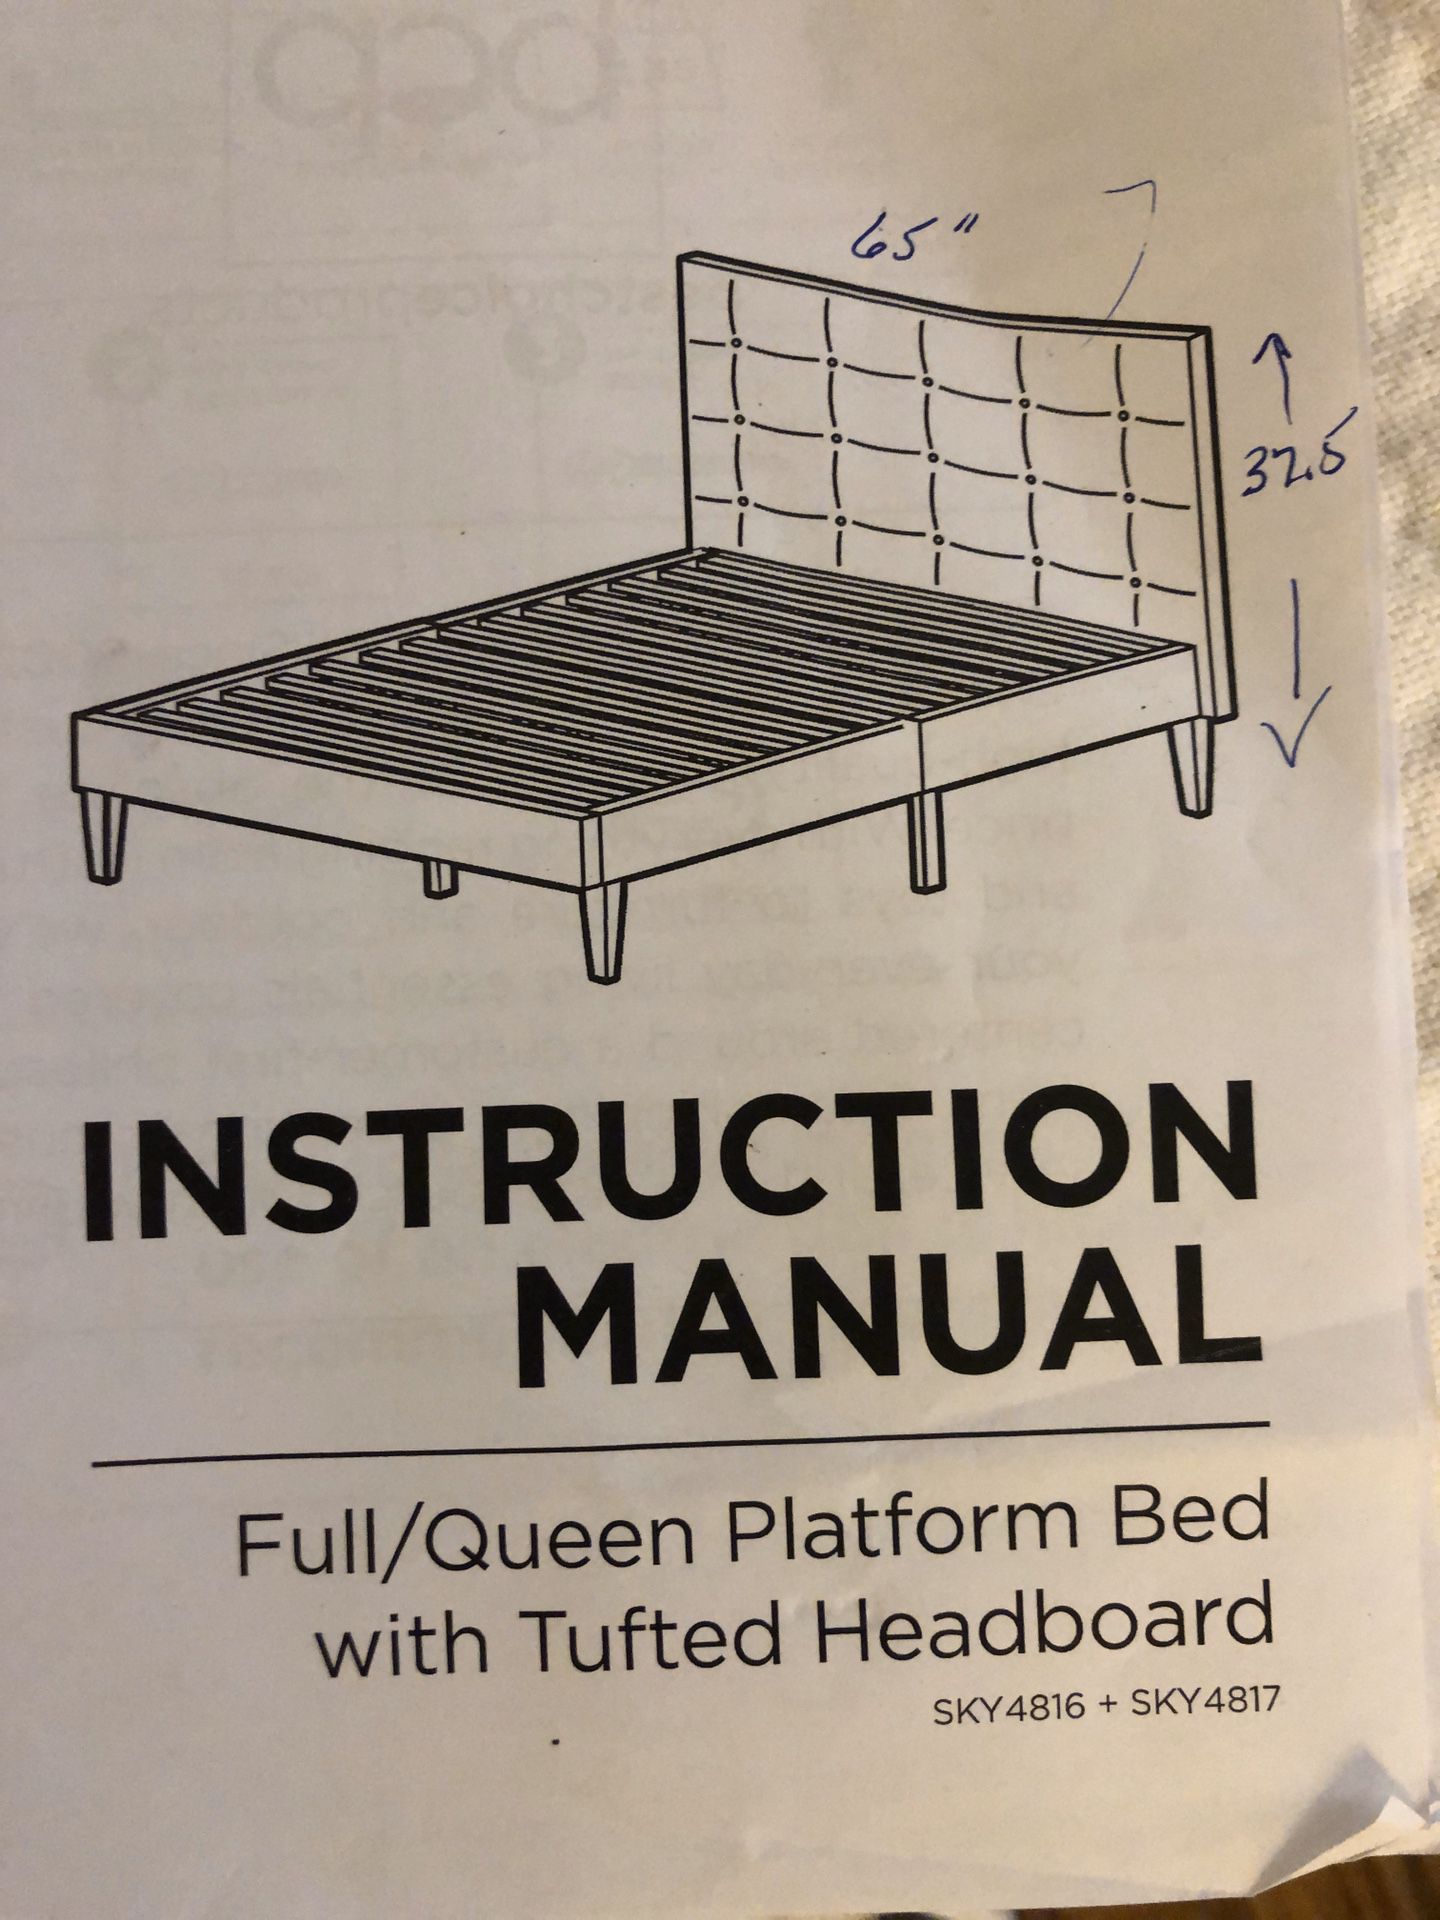 Queen bed. New in original packaging! Never used. Headboard and footboard are beige linen